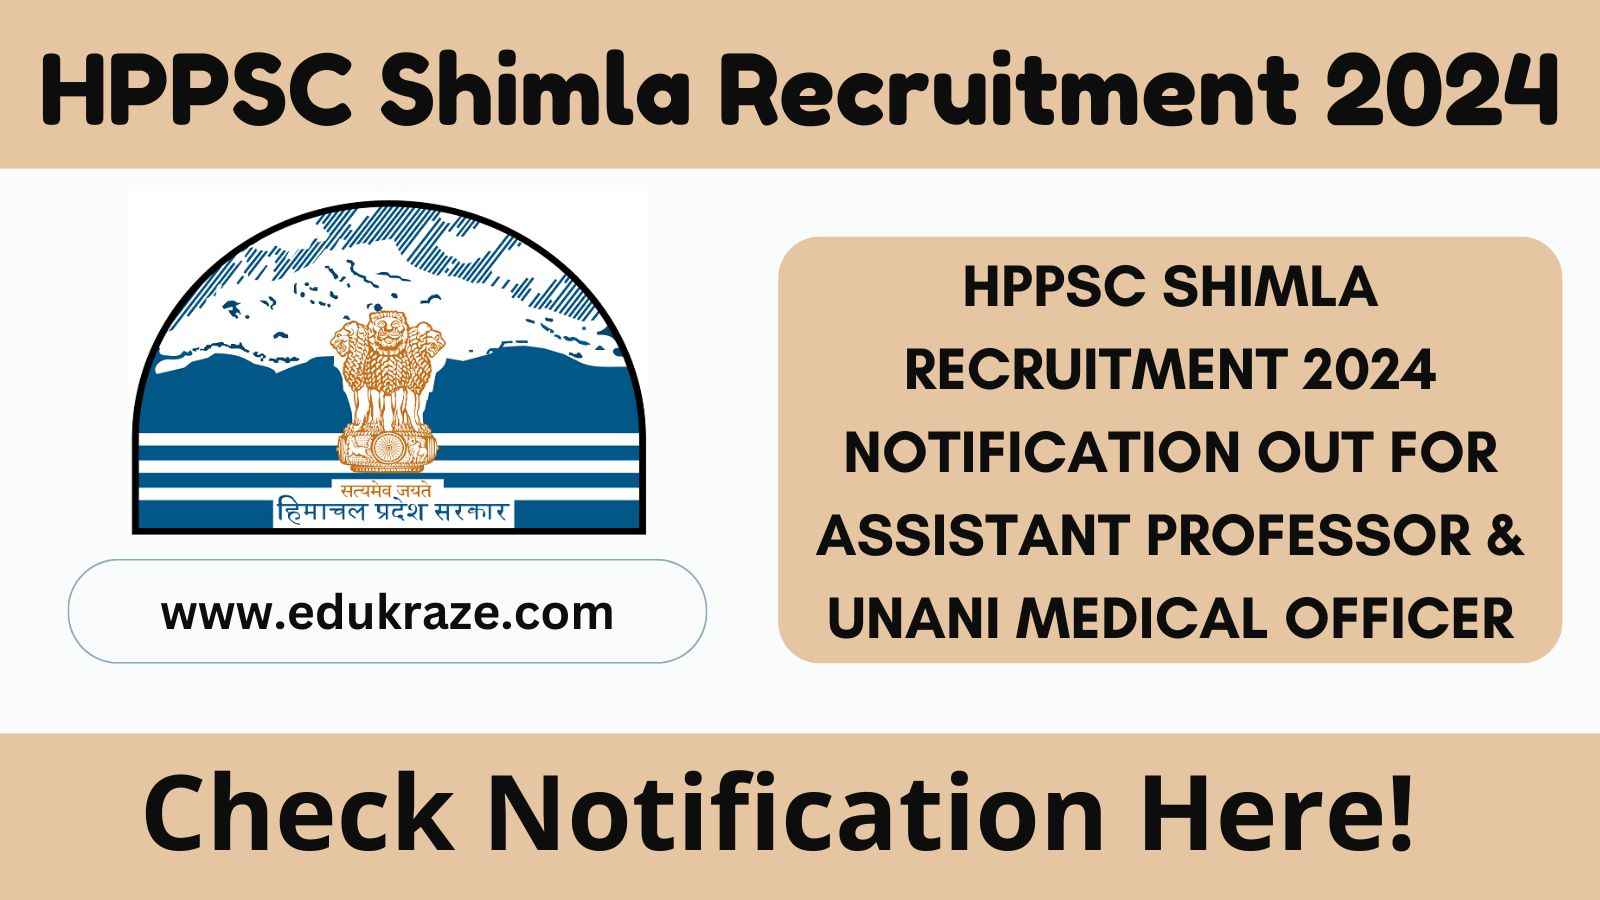 HPPSC Shimla Recruitment 2024 Notification Out For Assistant Professor & Unani Medical Officer